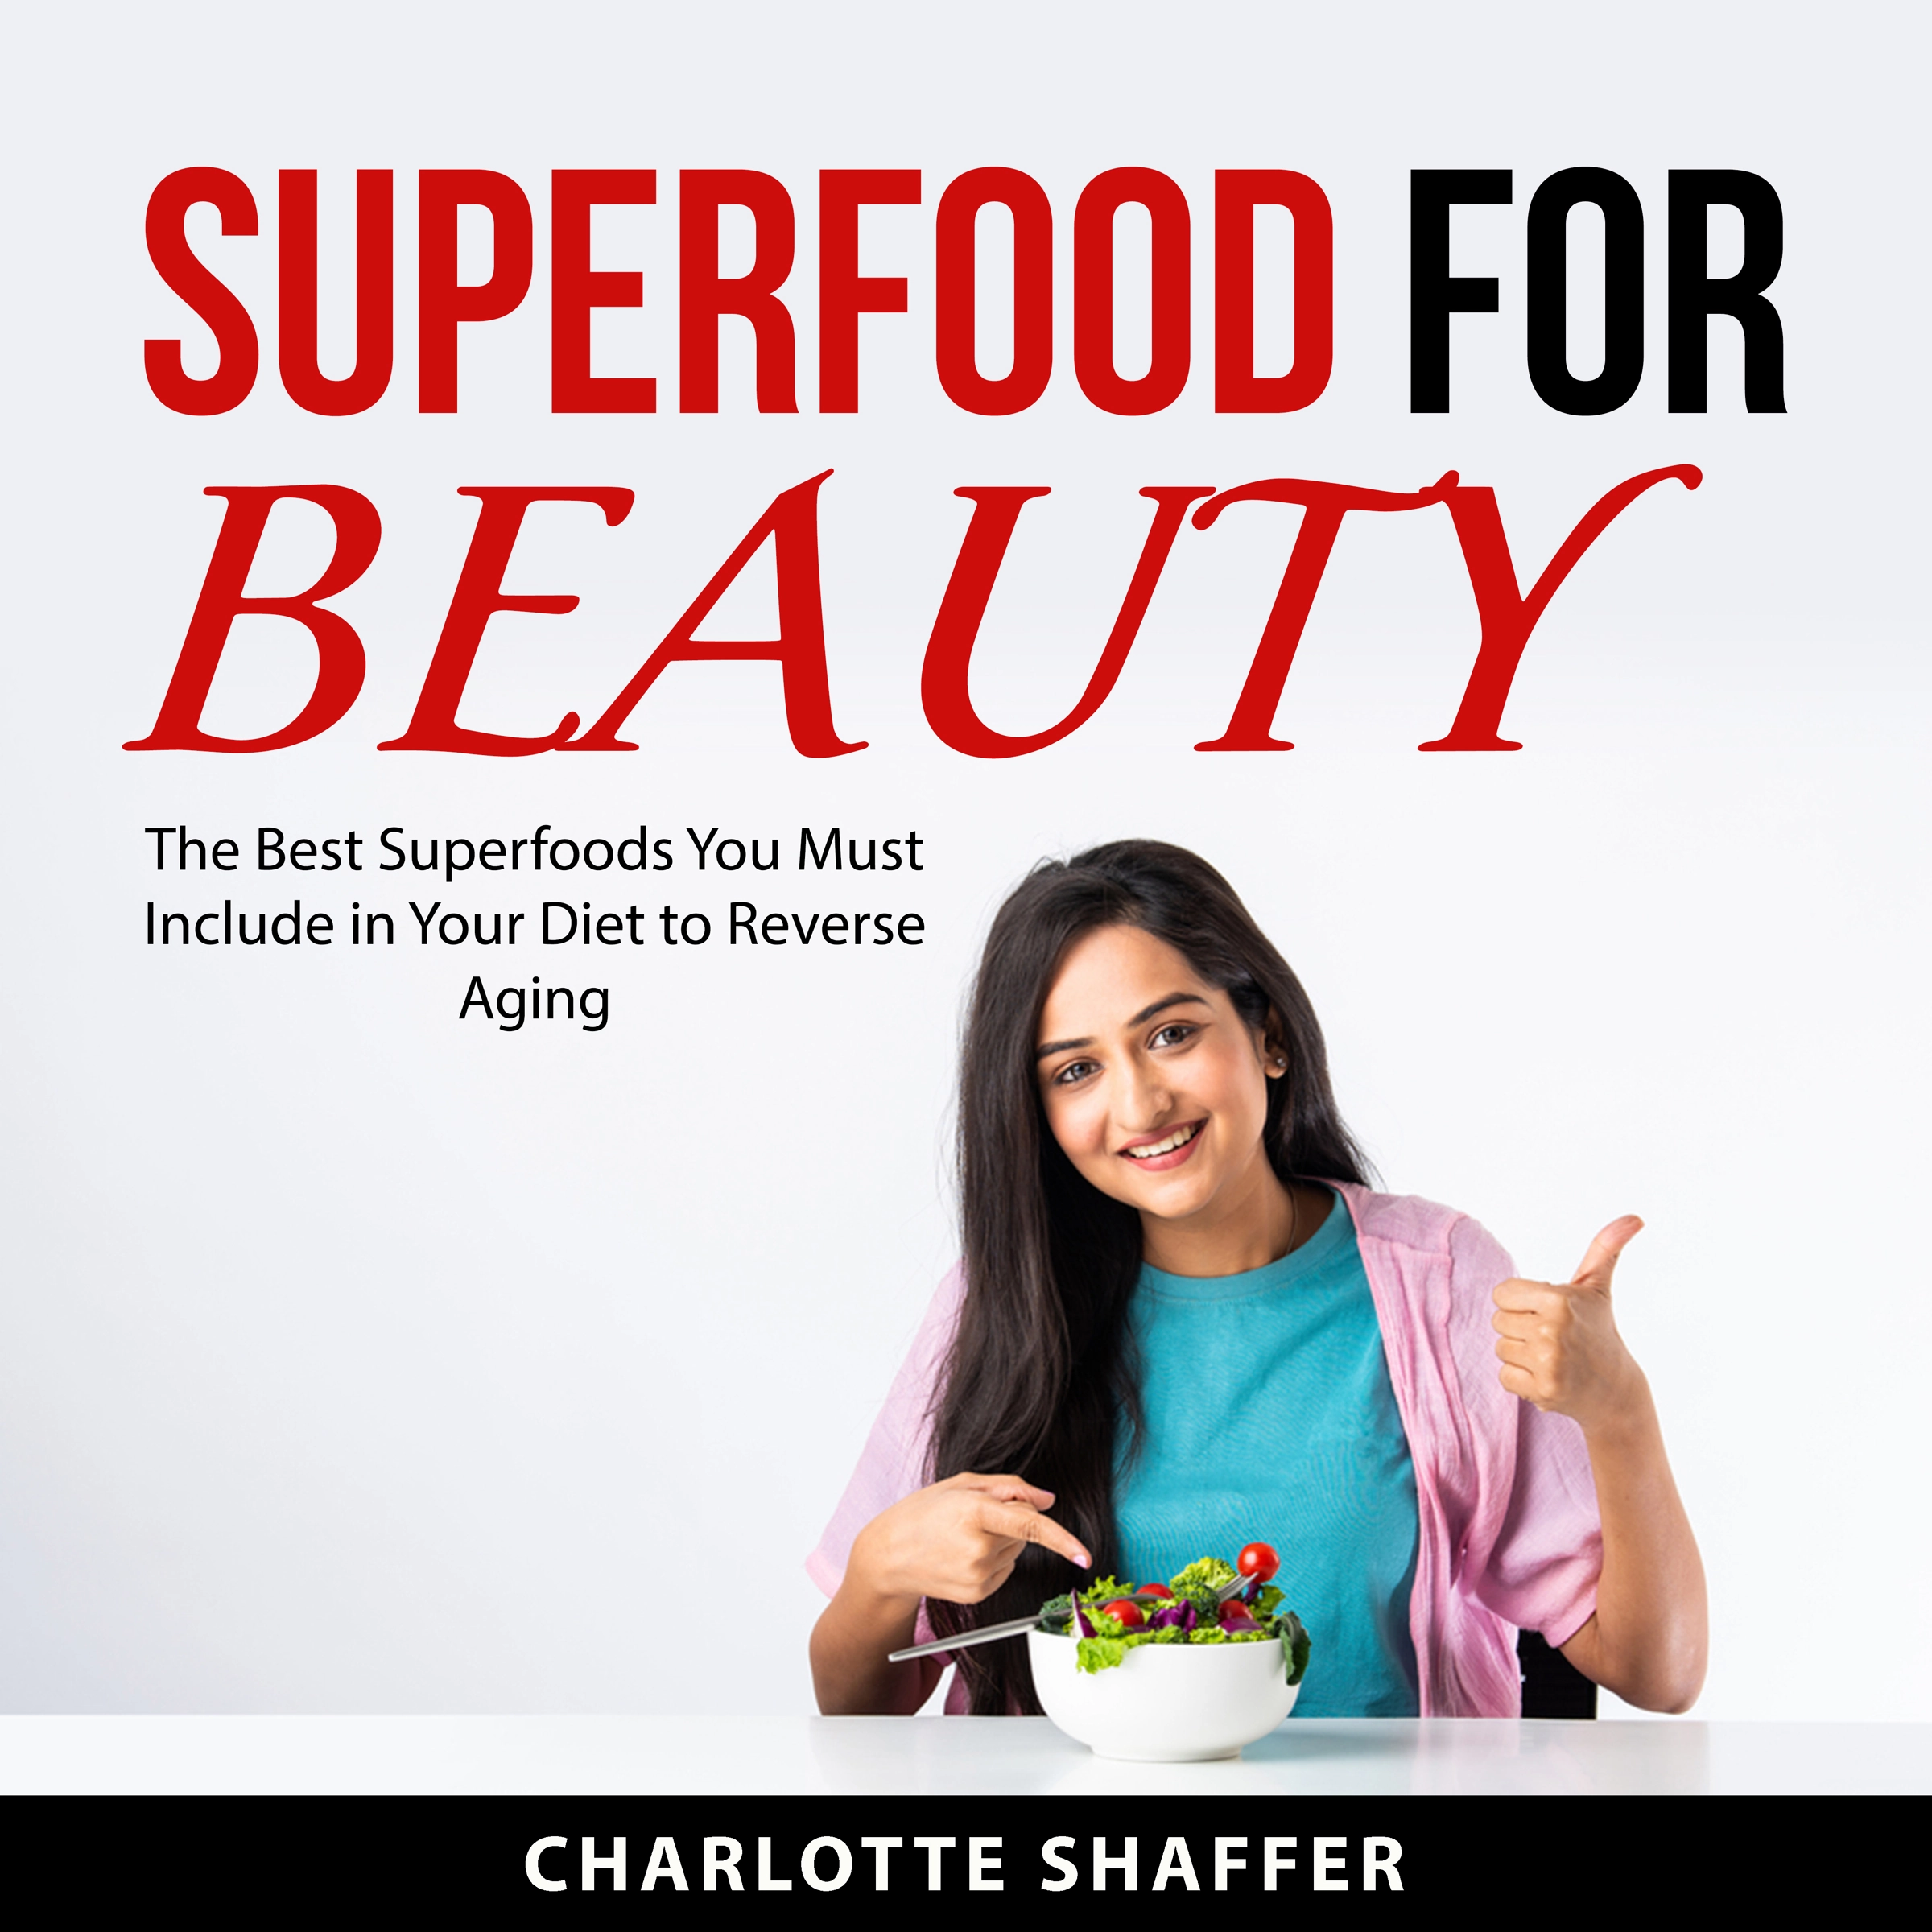 Superfood For Beauty Audiobook by Charlotte Shaffer